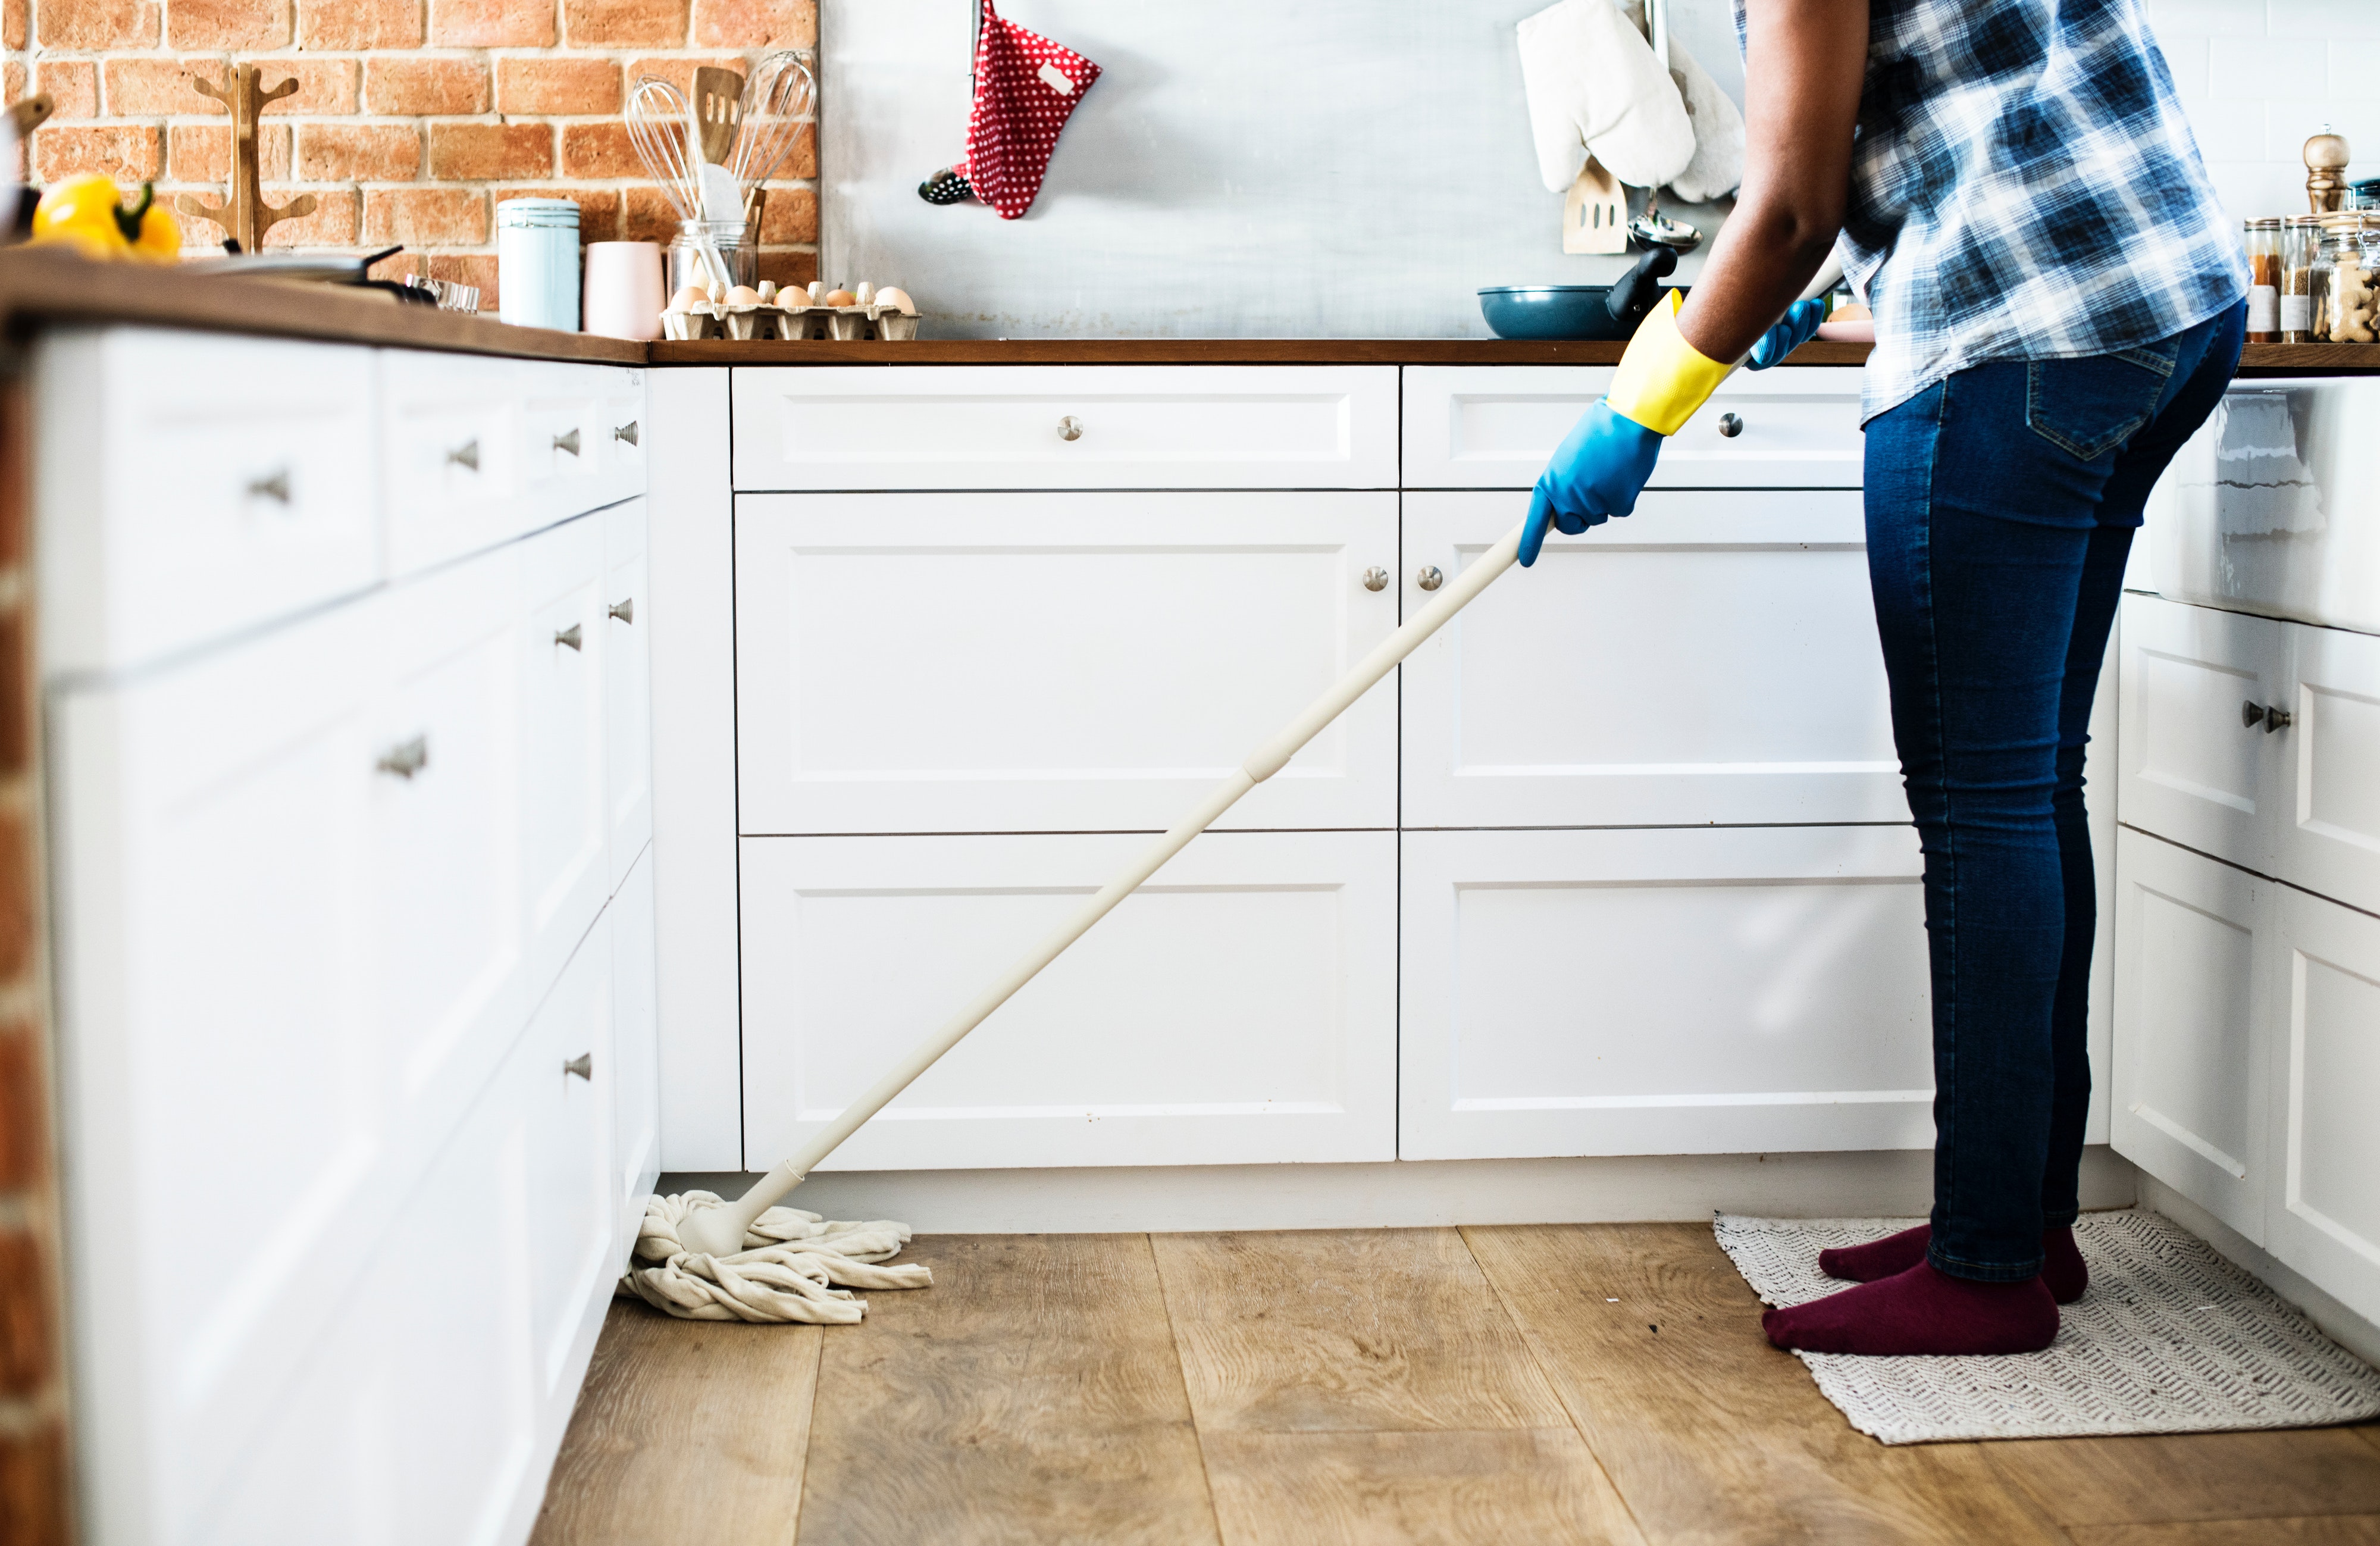 8 Great Benefits of Keeping a Clean Home and Workspace